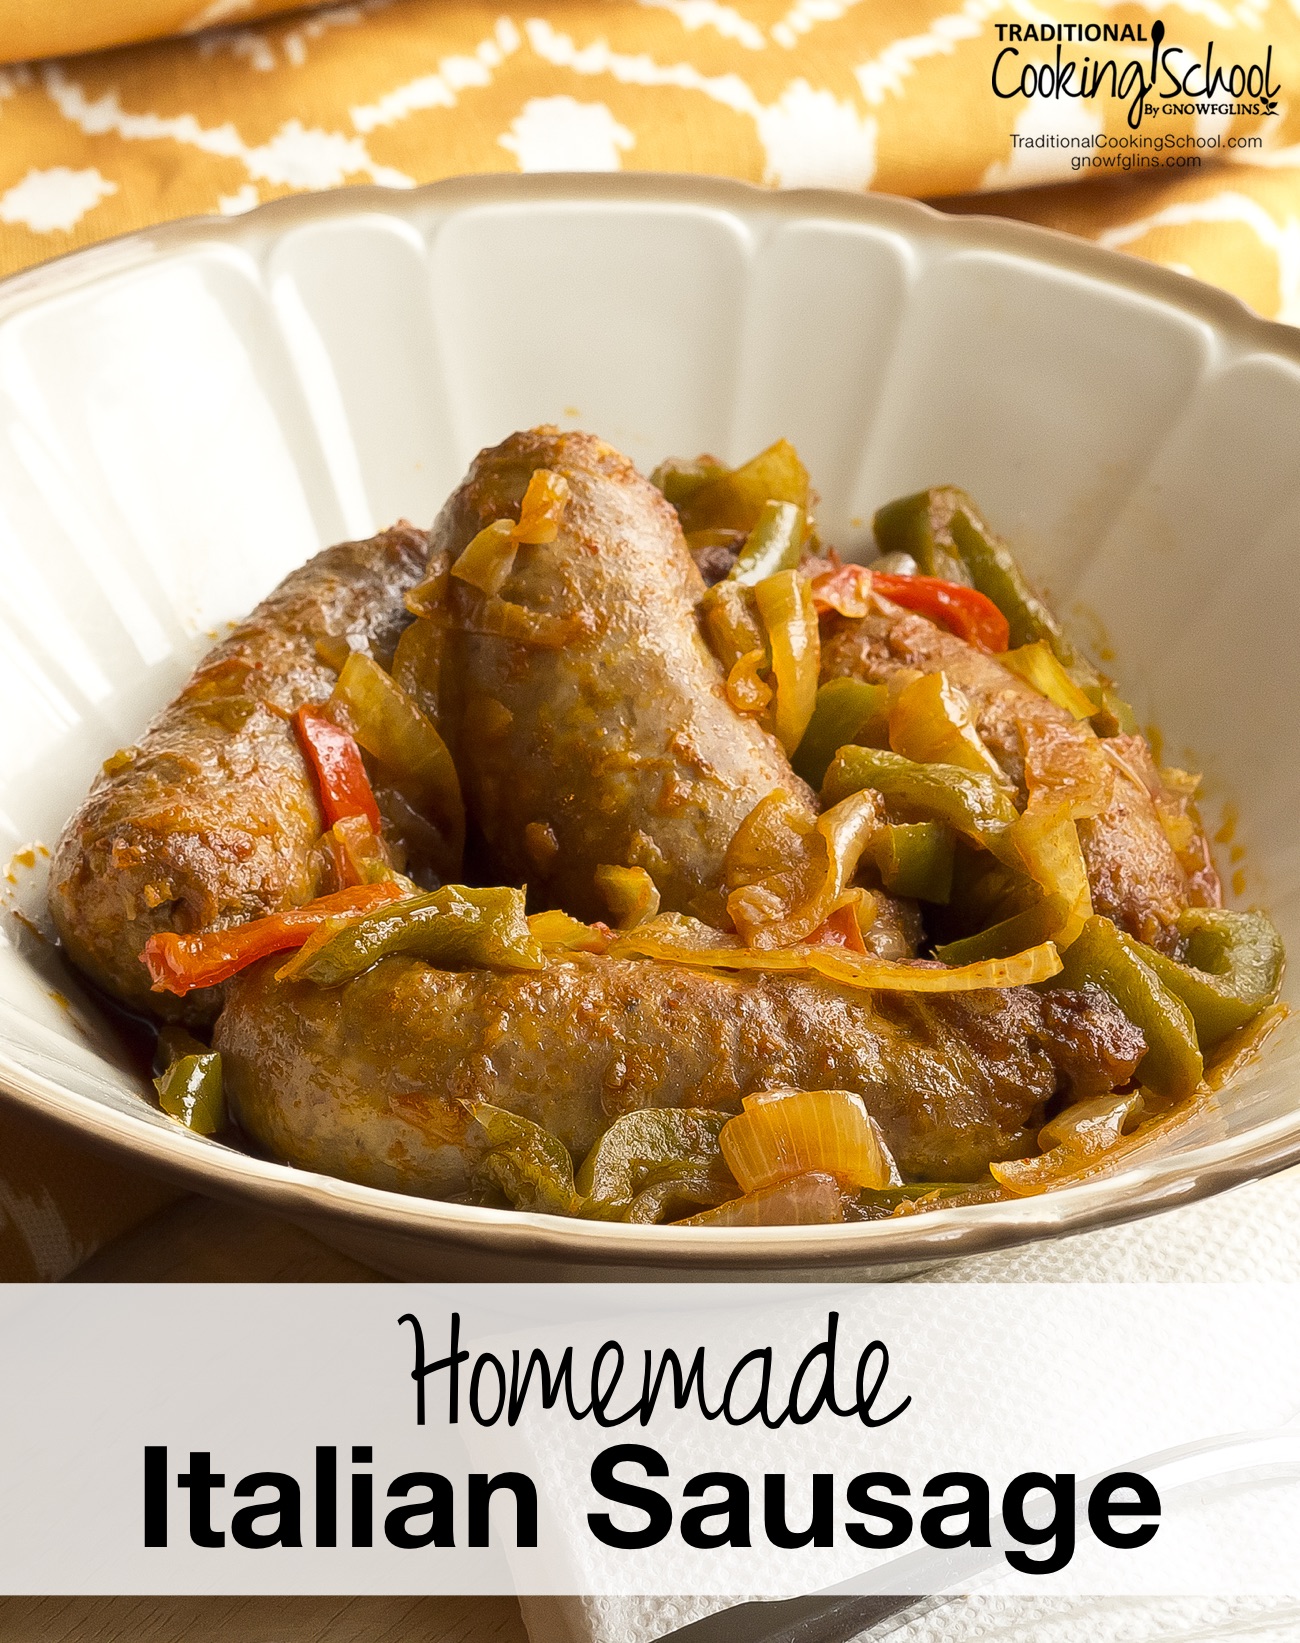 Homemade Italian Sausage | Sausage... A gourmet delicacy, yet it is the essence of nose-to-tail farm frugality. Nothing goes to waste when all the scraps and small pieces of meat are used to make sausage. Salting, smoking, fermenting, and drying are all ways to preserve meat for longer without refrigeration. Sausage made at home from the best local, pastured meats, mixed with tons of wholesome flavor, avoids all the chemicals found in processed meats. | TraditionalCookingSchool.com